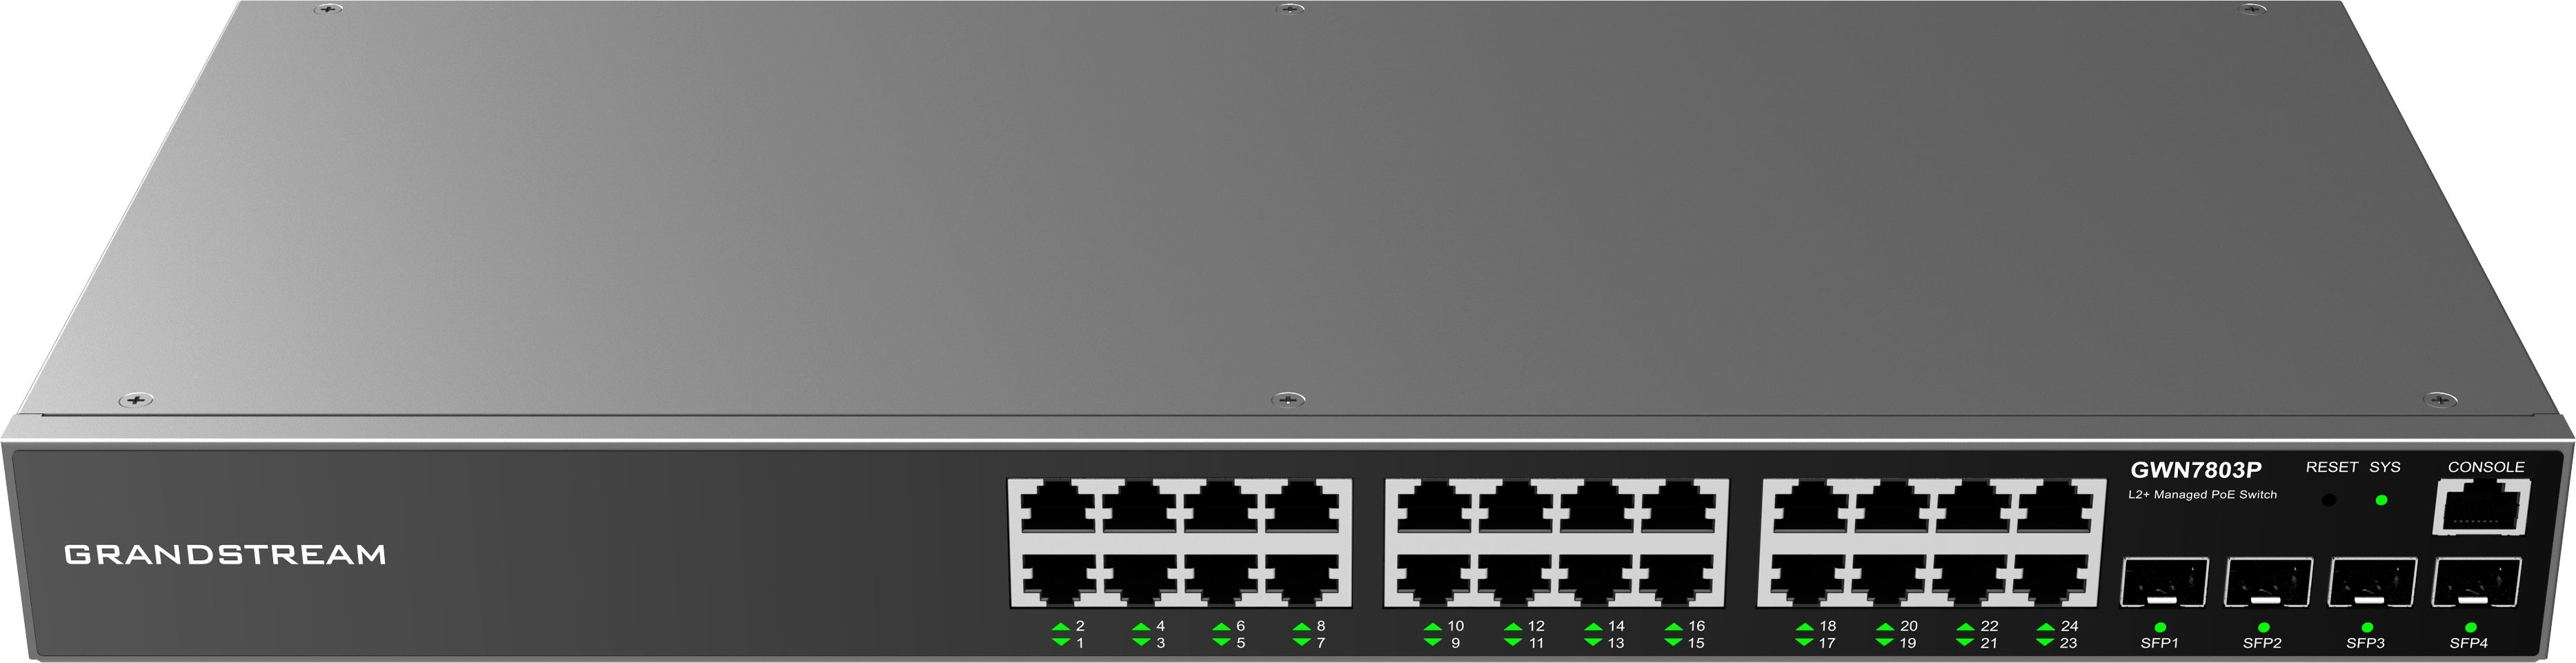 Grandstream GWN7803P Enterprise Layer 2+ Managed PoE Network Switch (6947273704270 Networking Equipment Switches PoE Switches) photo